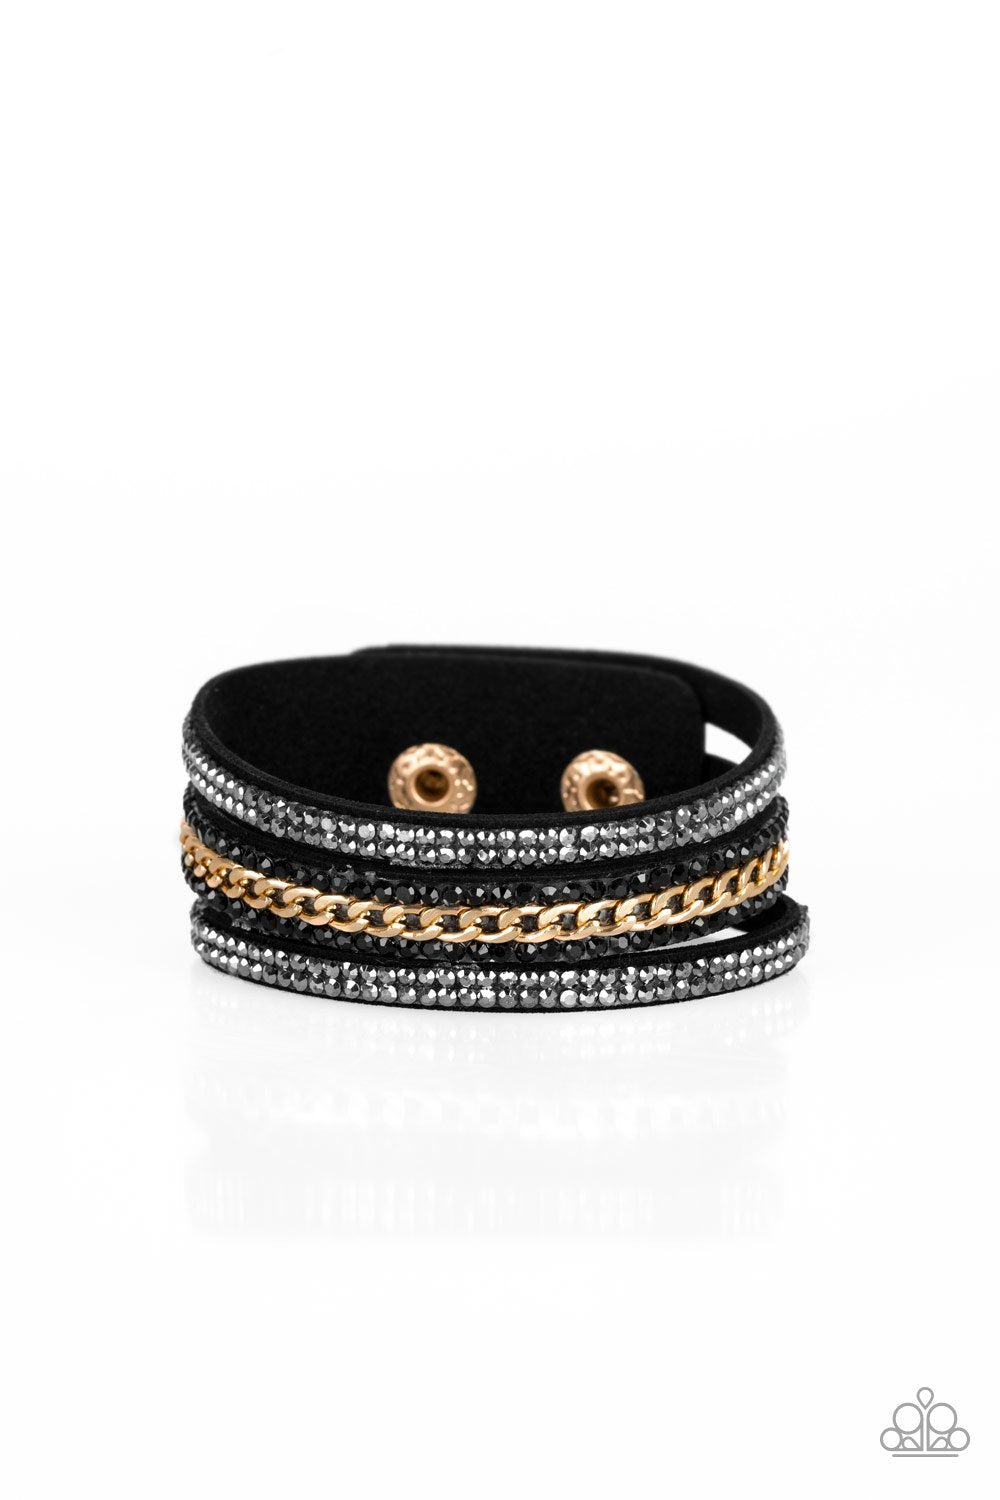 Rollin' In Rhinestones Black and Gold Urban Wrap Snap Bracelet - Paparazzi Accessories- lightbox - CarasShop.com - $5 Jewelry by Cara Jewels